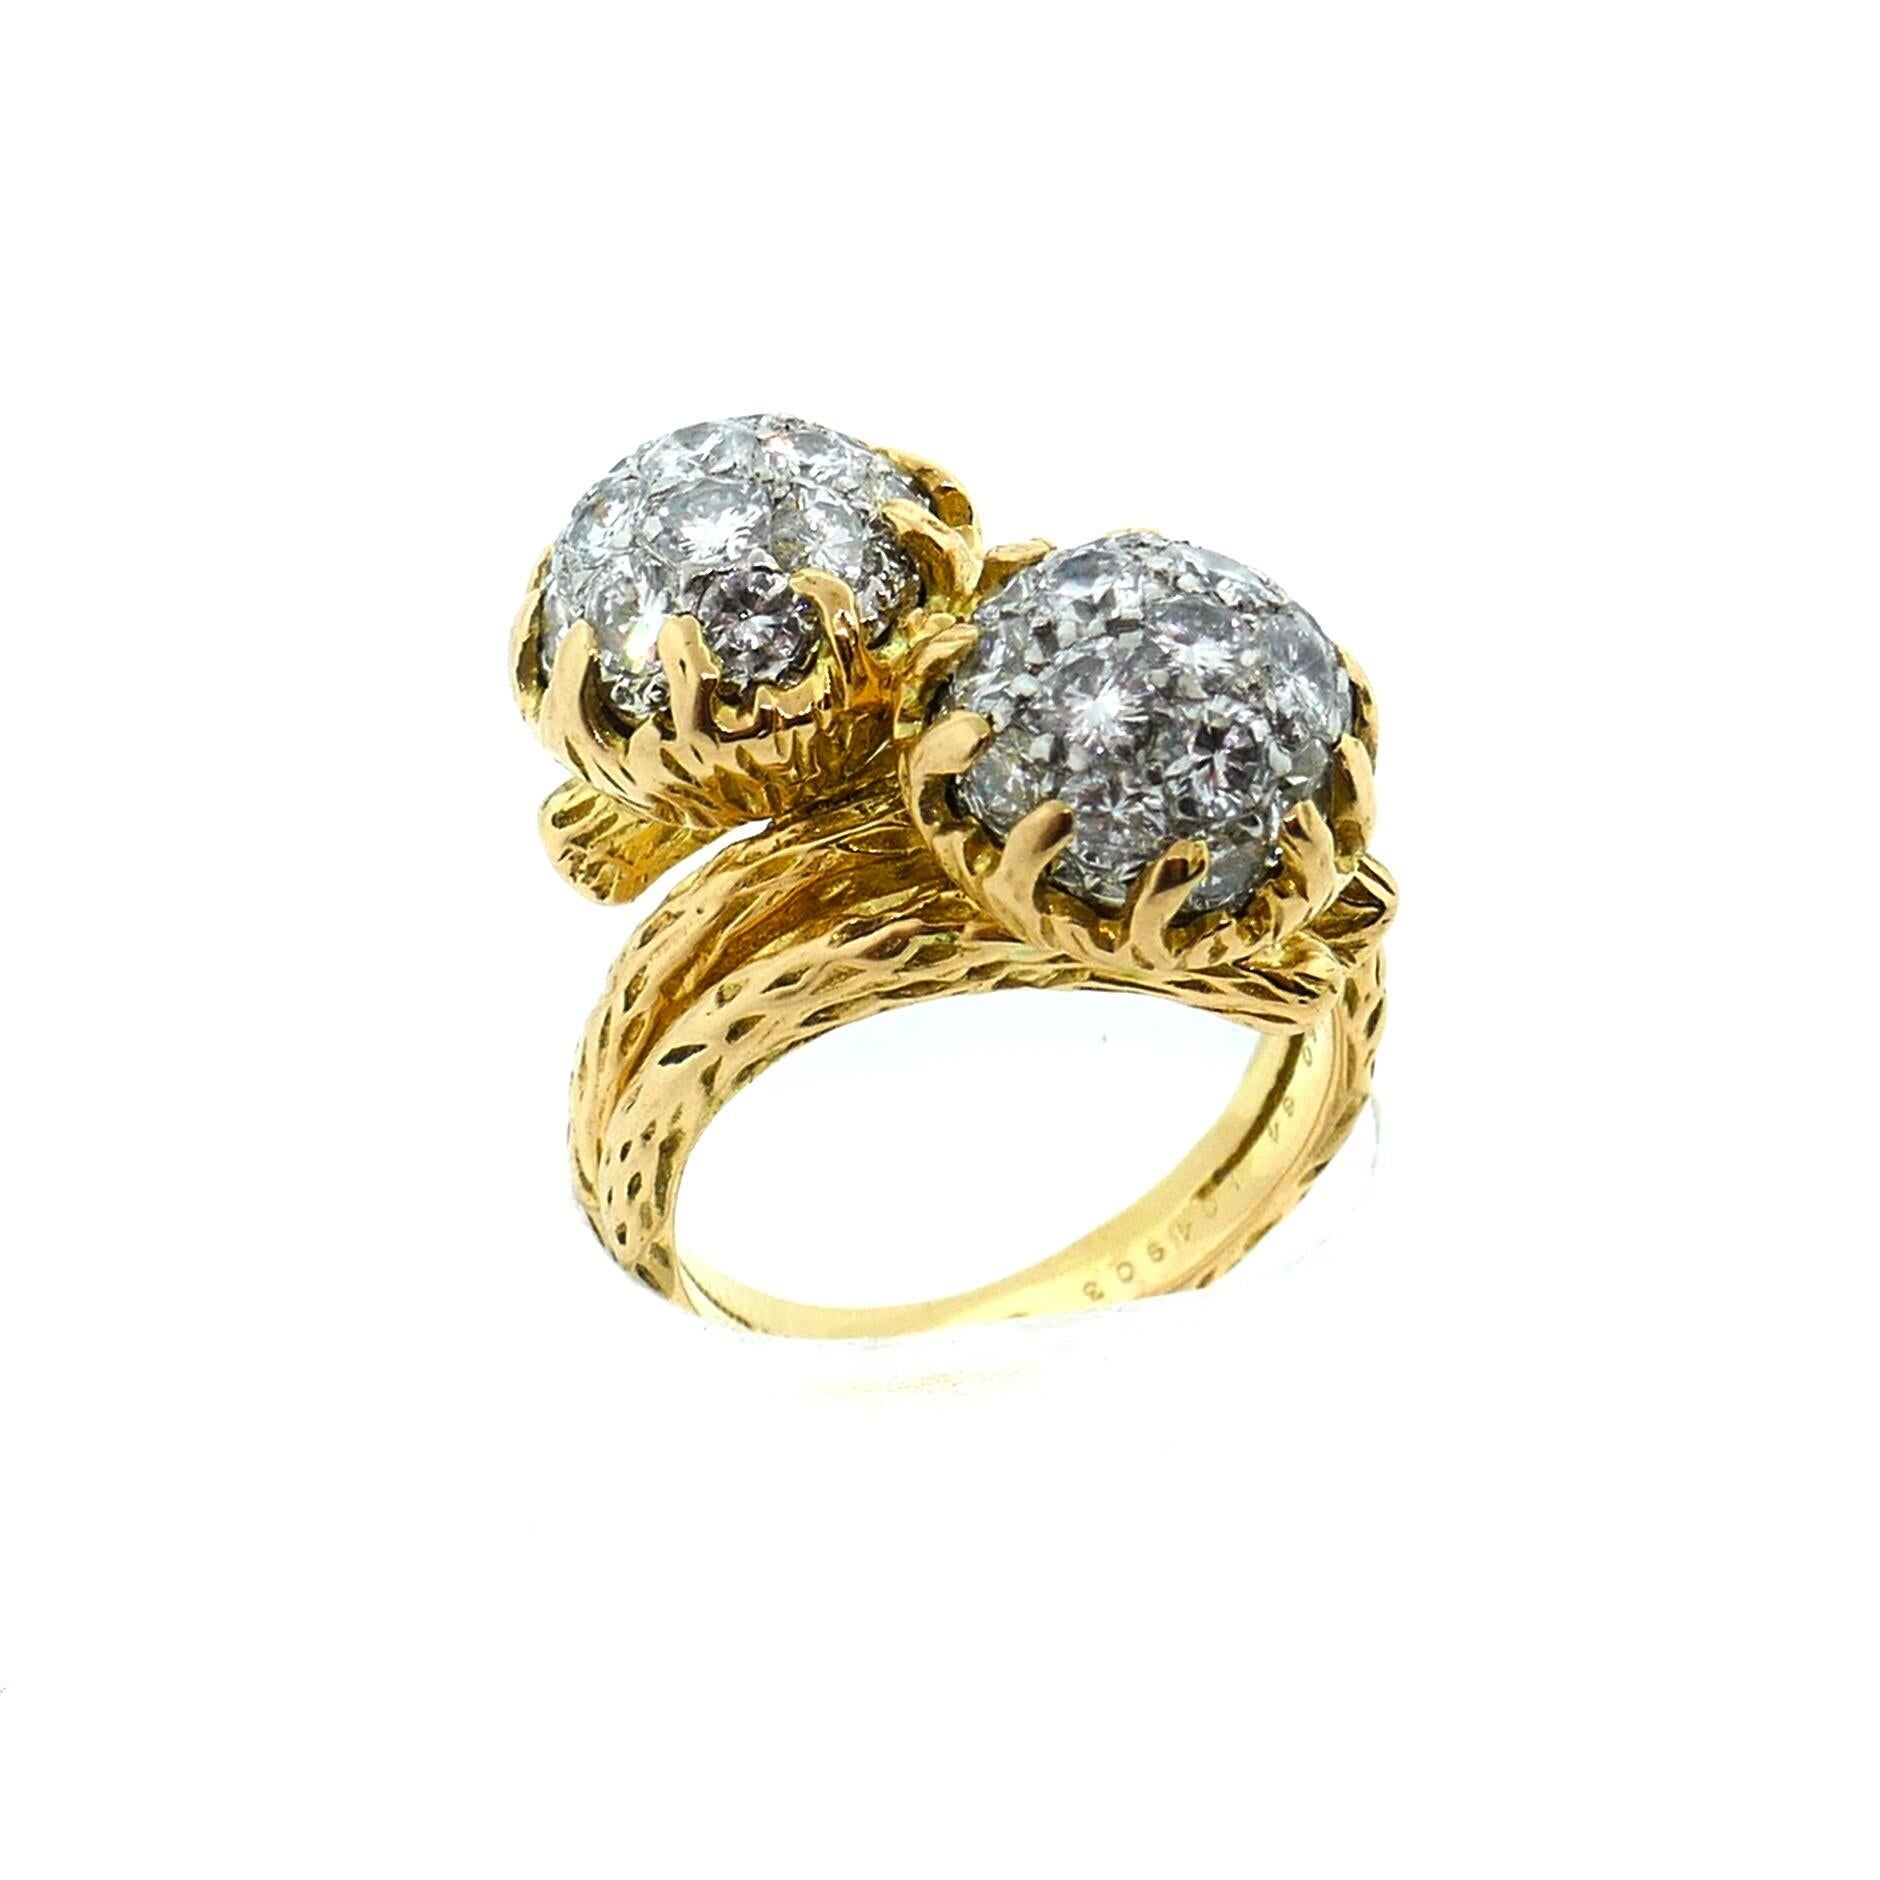 Van Cleef & Arpels Textured 18K Yellow Gold and Platinum Diamond Bypass Ring

This Van Cleef & Arpels ring is done in the classic 